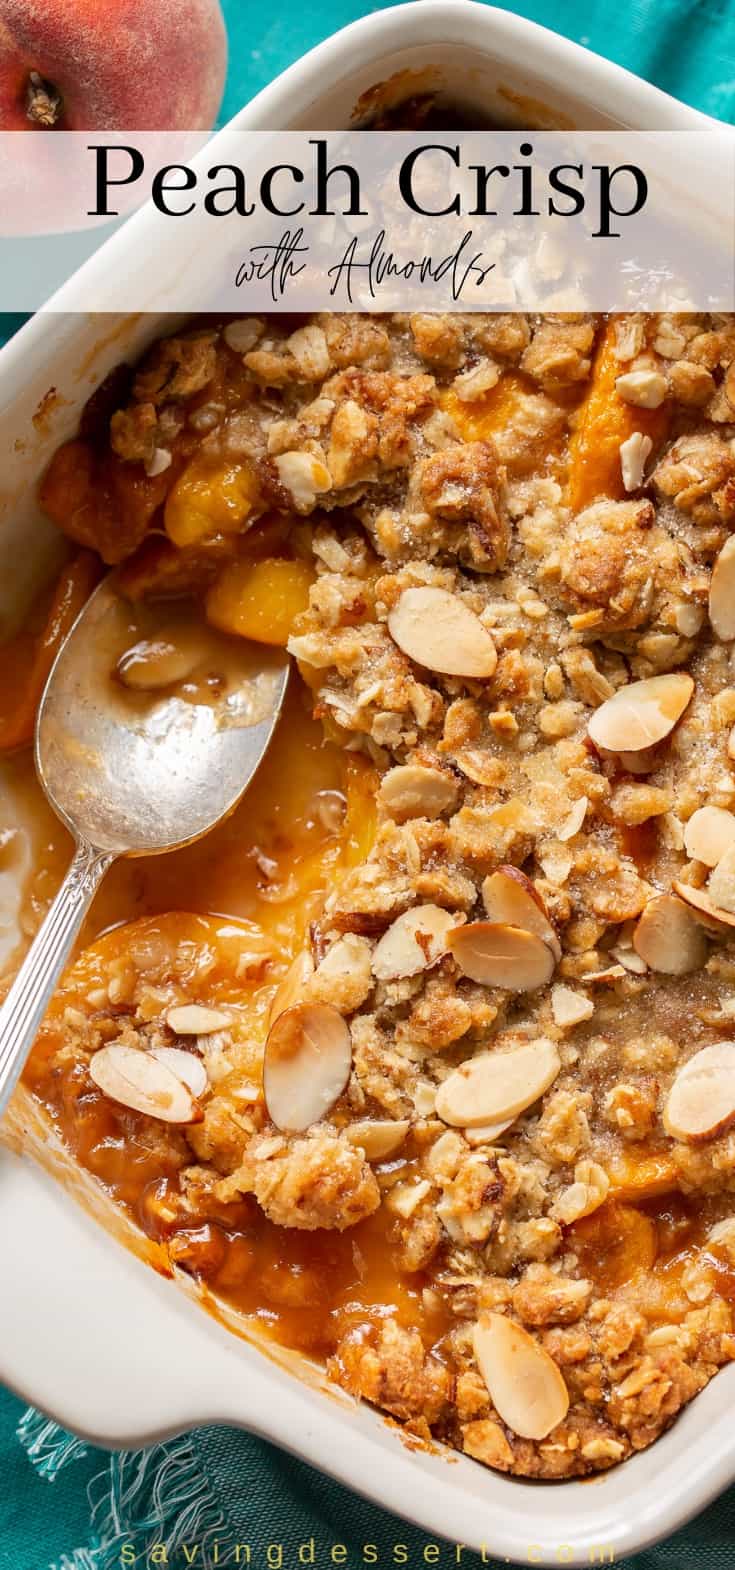 Overhead view of a square casserole dish filled with peach crisp with oats and sliced almonds